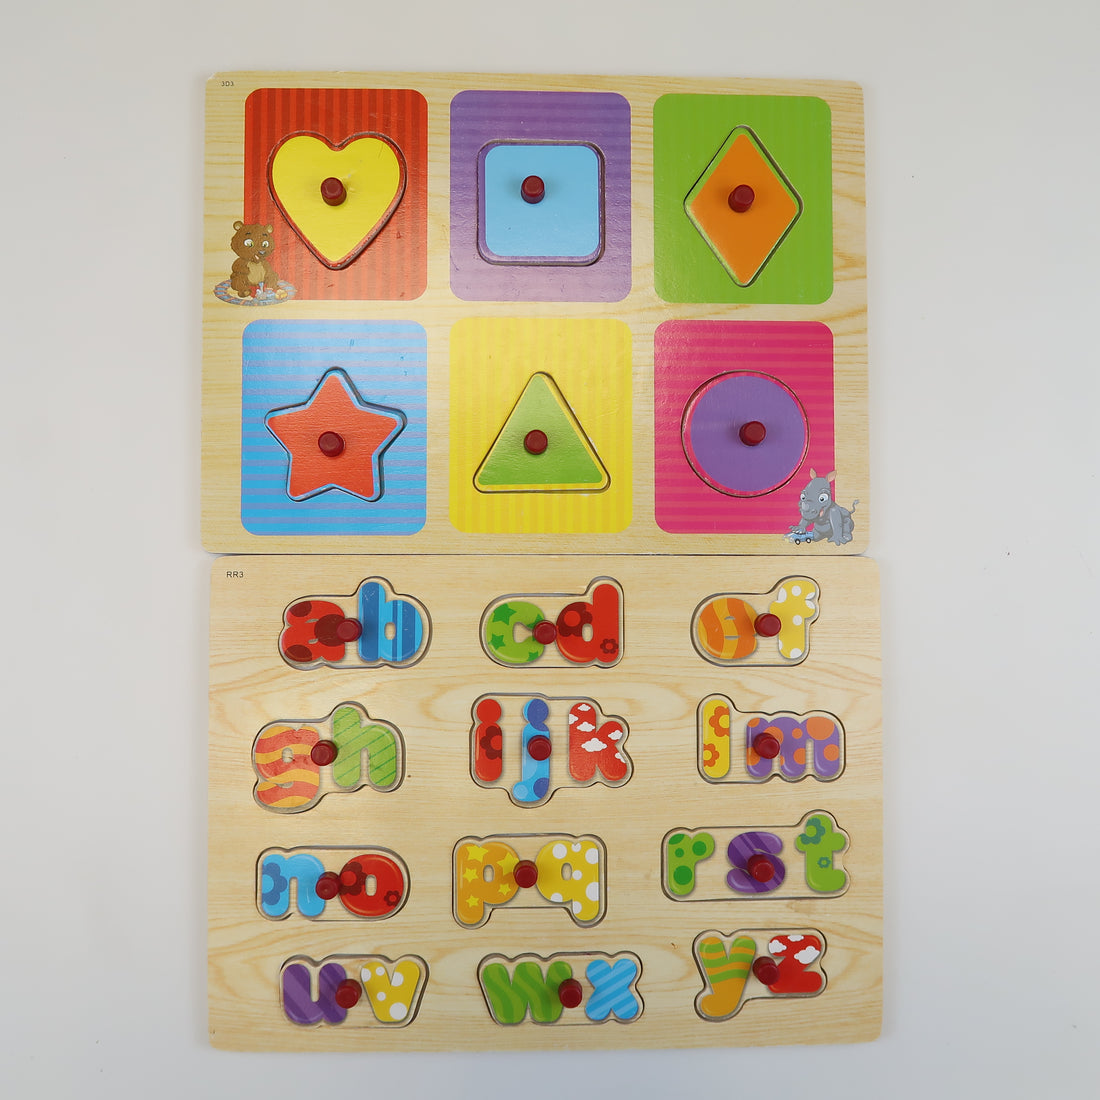 Unknown Brand - Wooden Puzzle